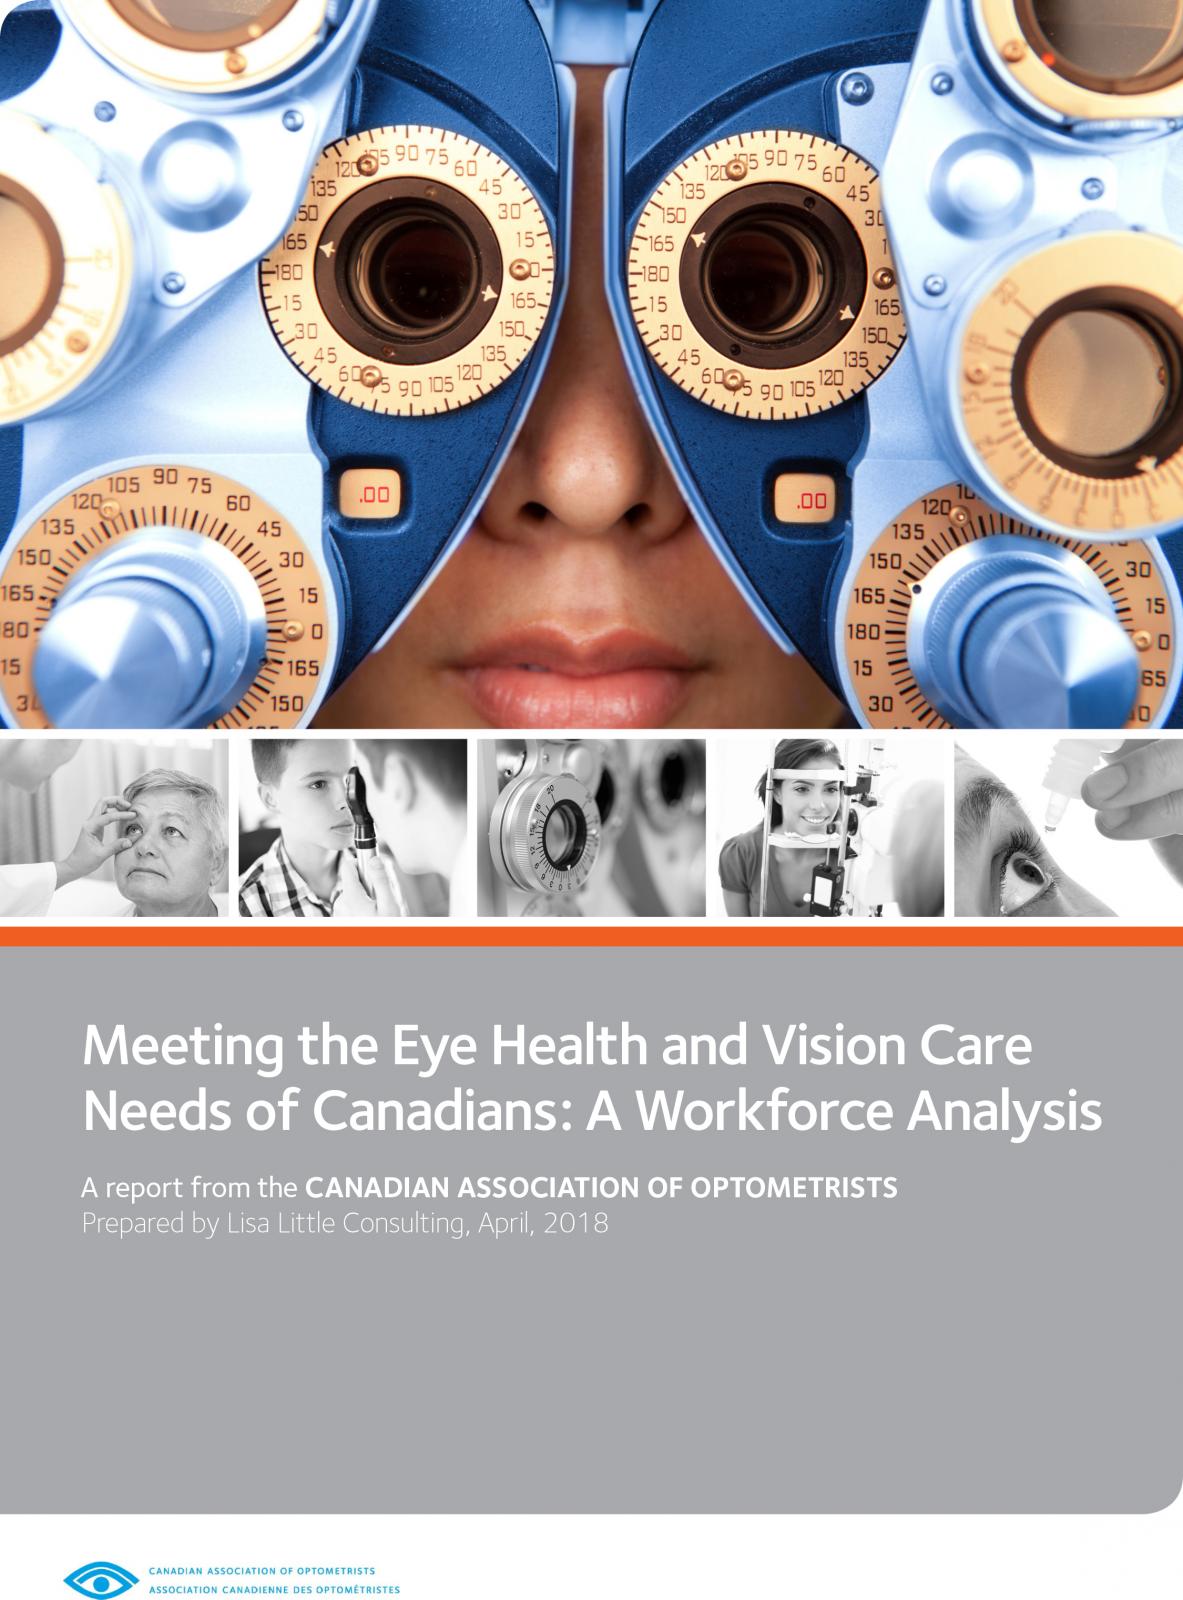 Meeting the Eye Health and Vision Care Needs of Canadians: A Workforce Analysis